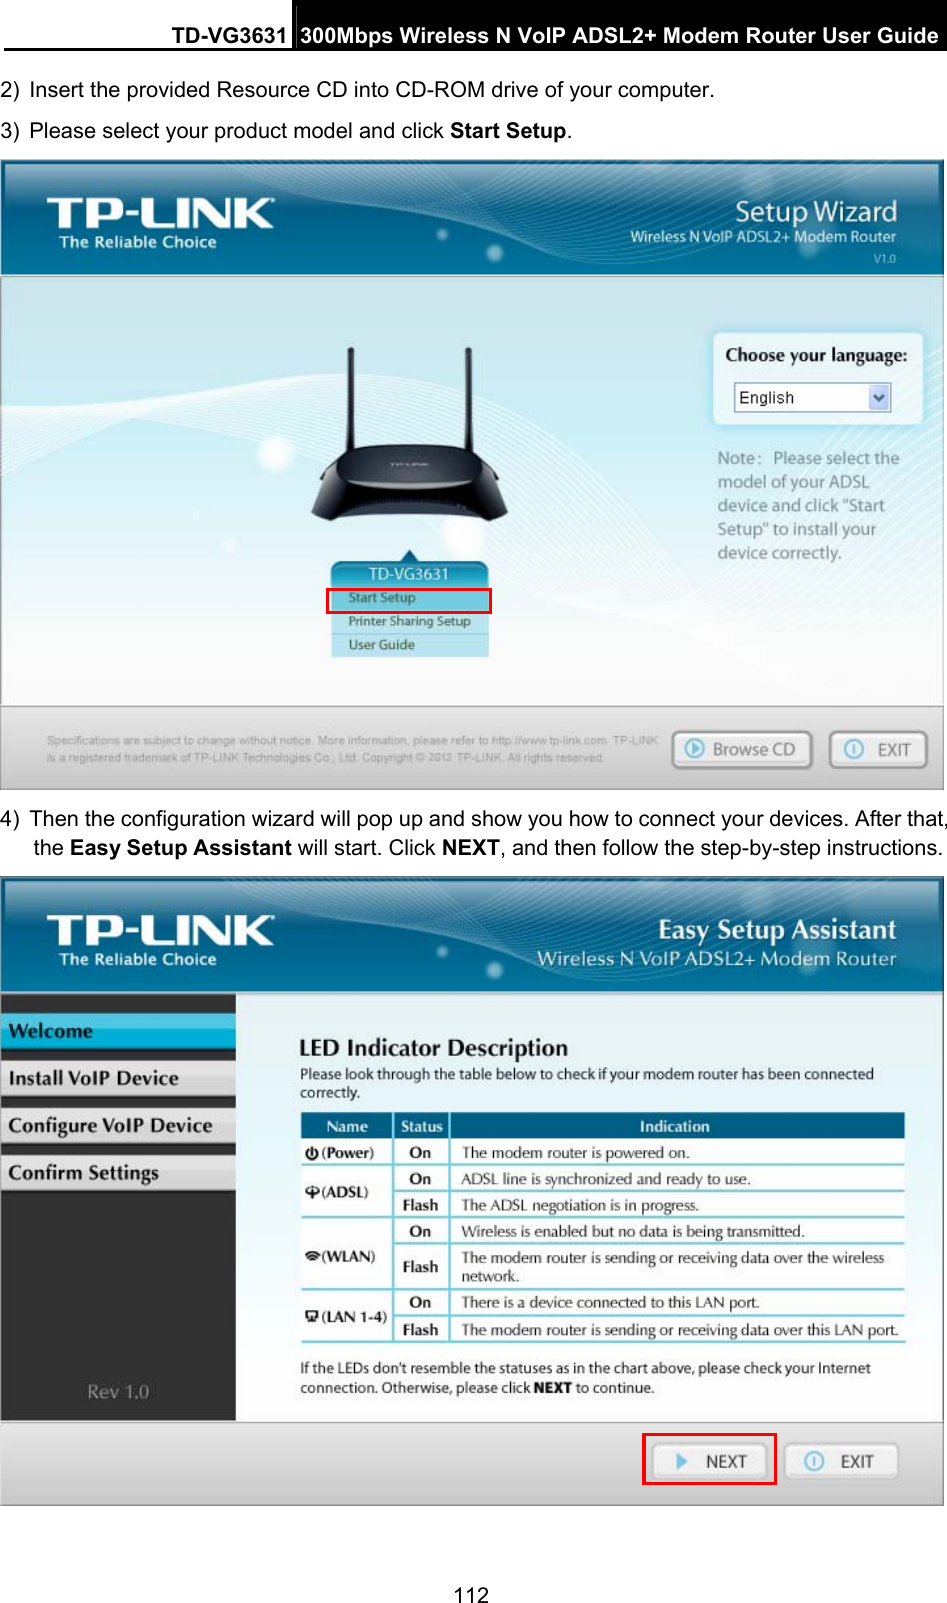 TD-VG3631 300Mbps Wireless N VoIP ADSL2+ Modem Router User Guide 112 2)  Insert the provided Resource CD into CD-ROM drive of your computer. 3)  Please select your product model and click Start Setup.   4)  Then the configuration wizard will pop up and show you how to connect your devices. After that, the Easy Setup Assistant will start. Click NEXT, and then follow the step-by-step instructions.  